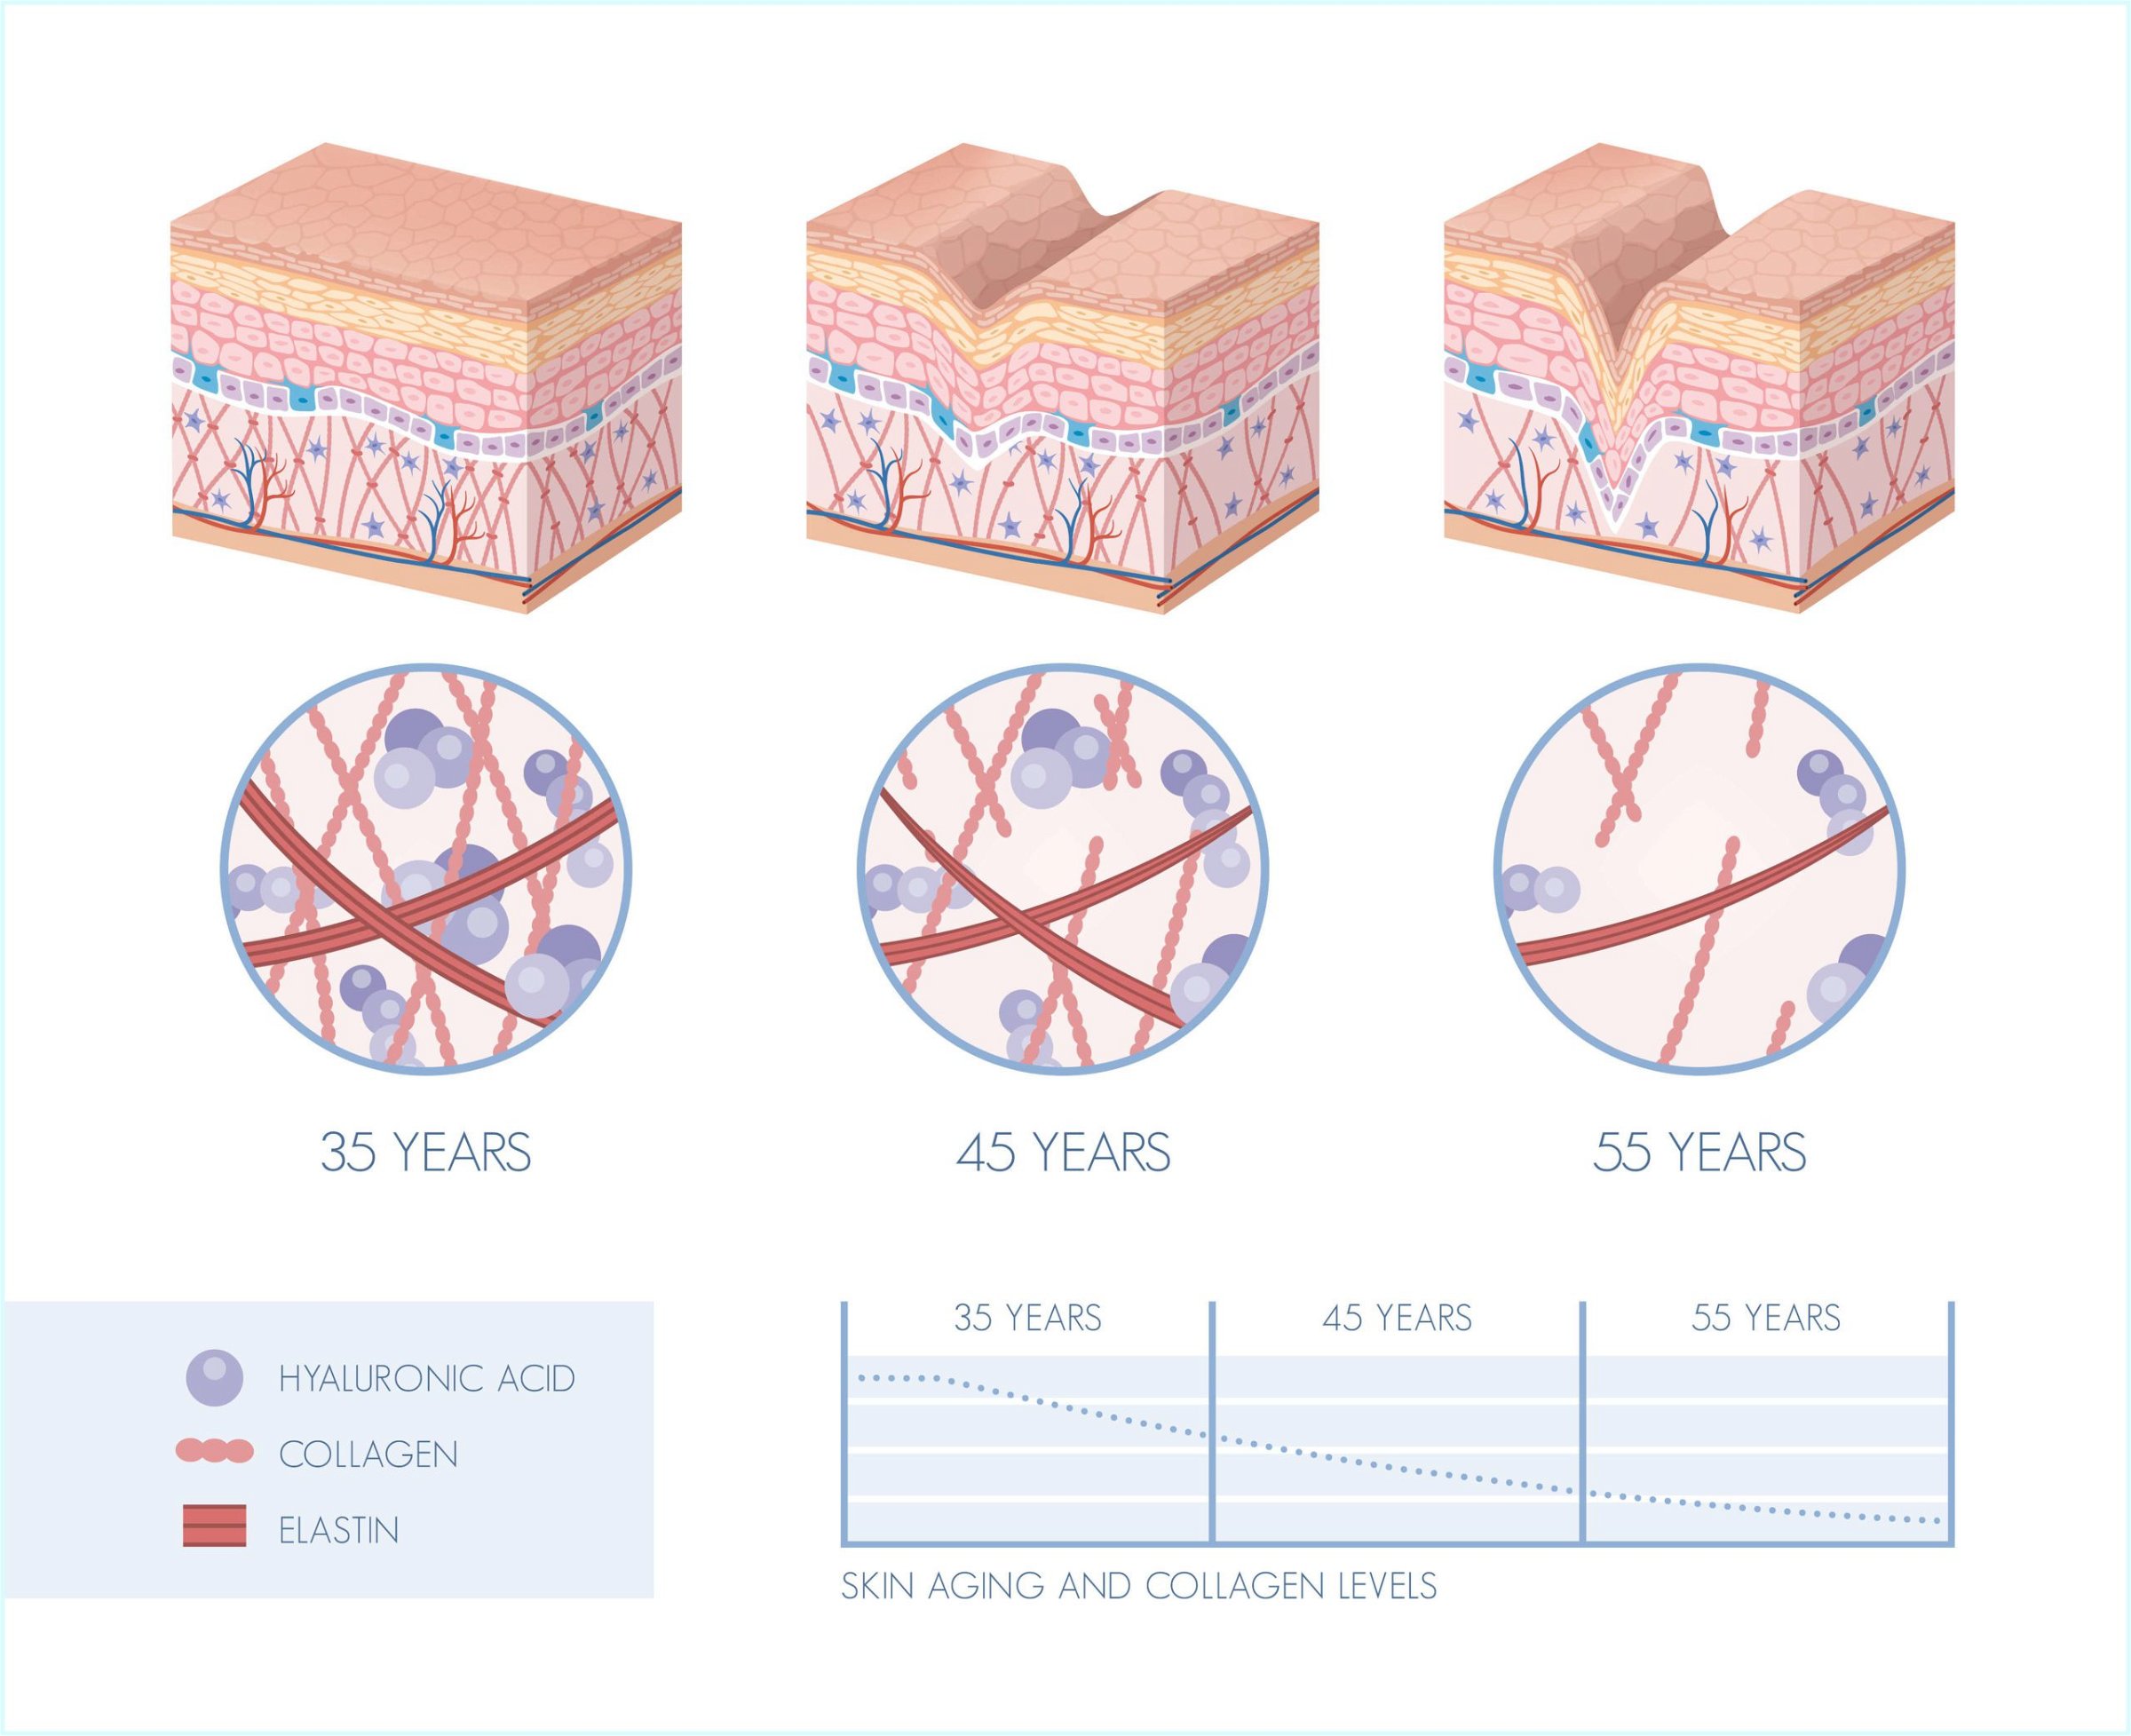 Graphic depicting collagen, elastin, and hyaluronic acid decrease in skin with age.